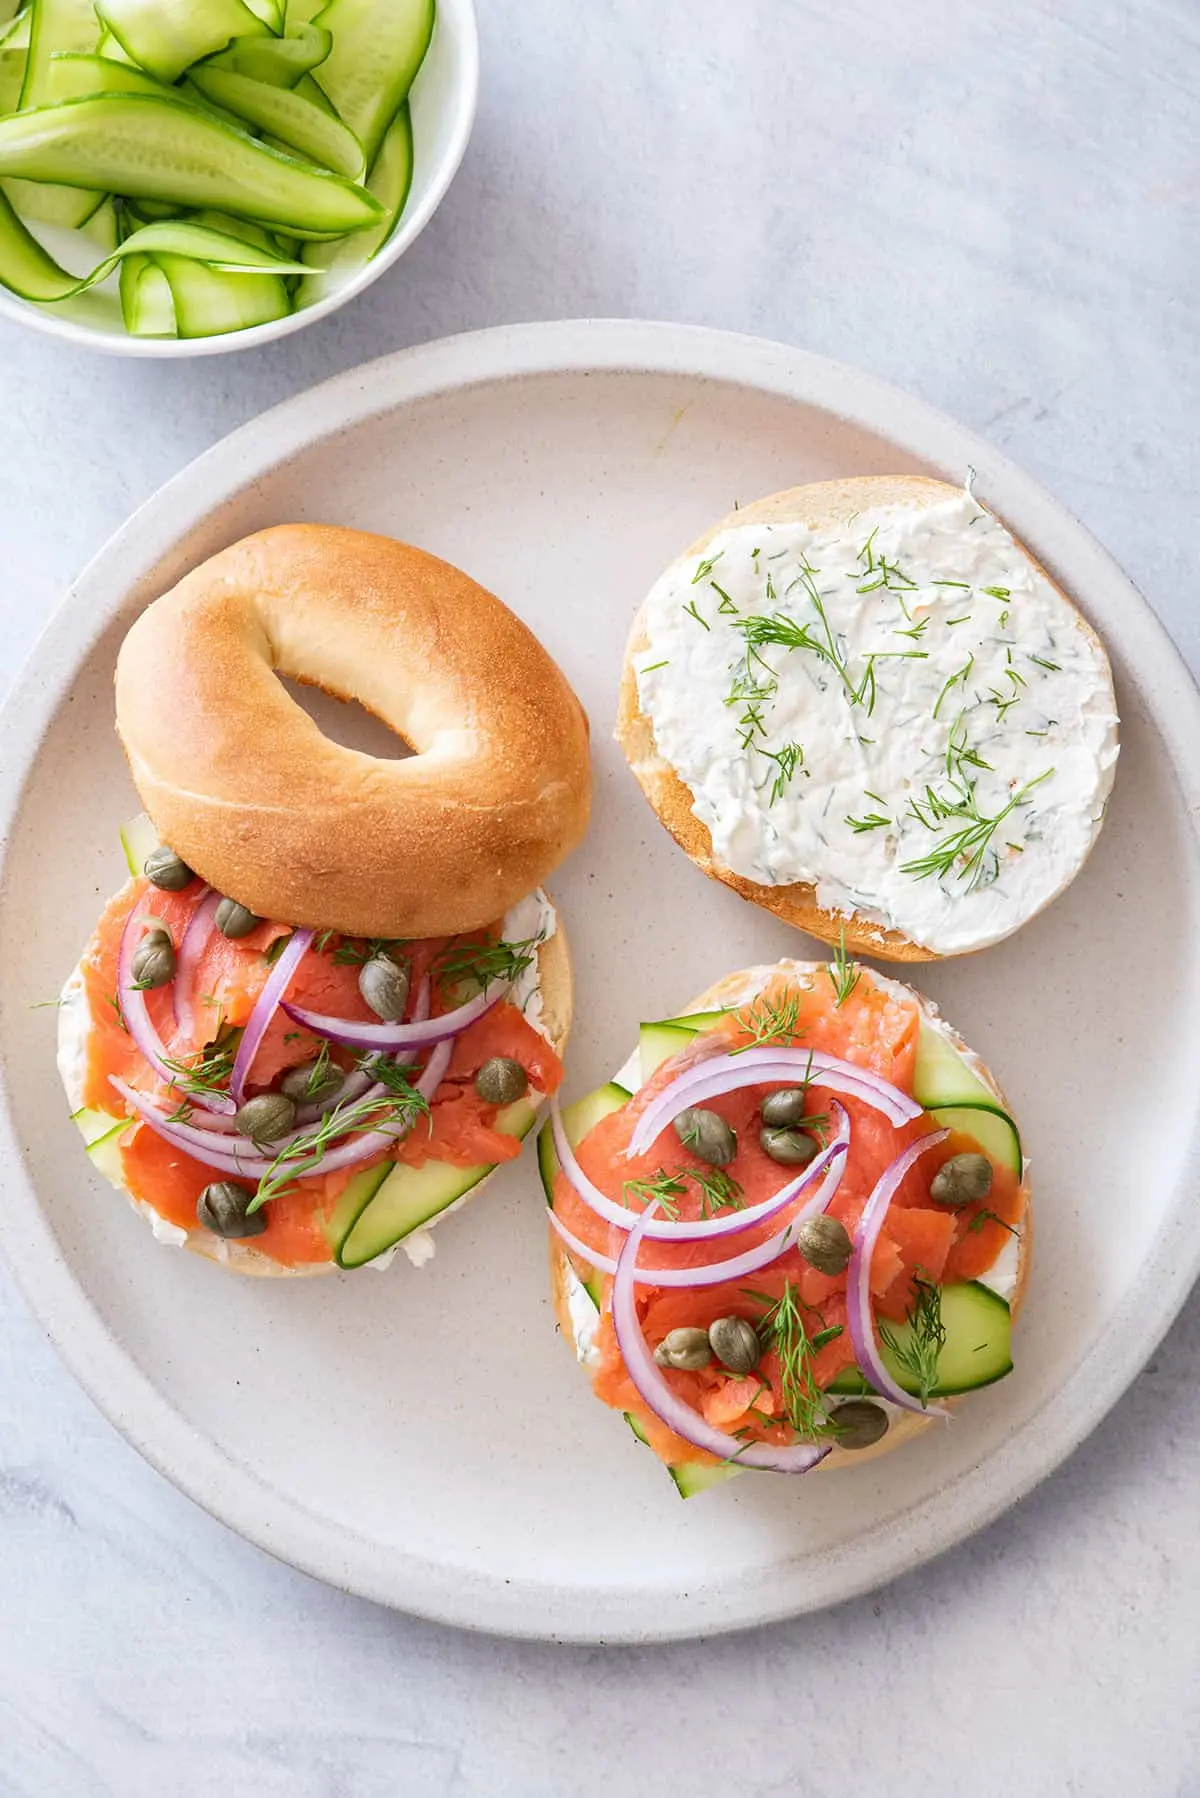 best smoked salmon for bagels - What kind of lox for bagels